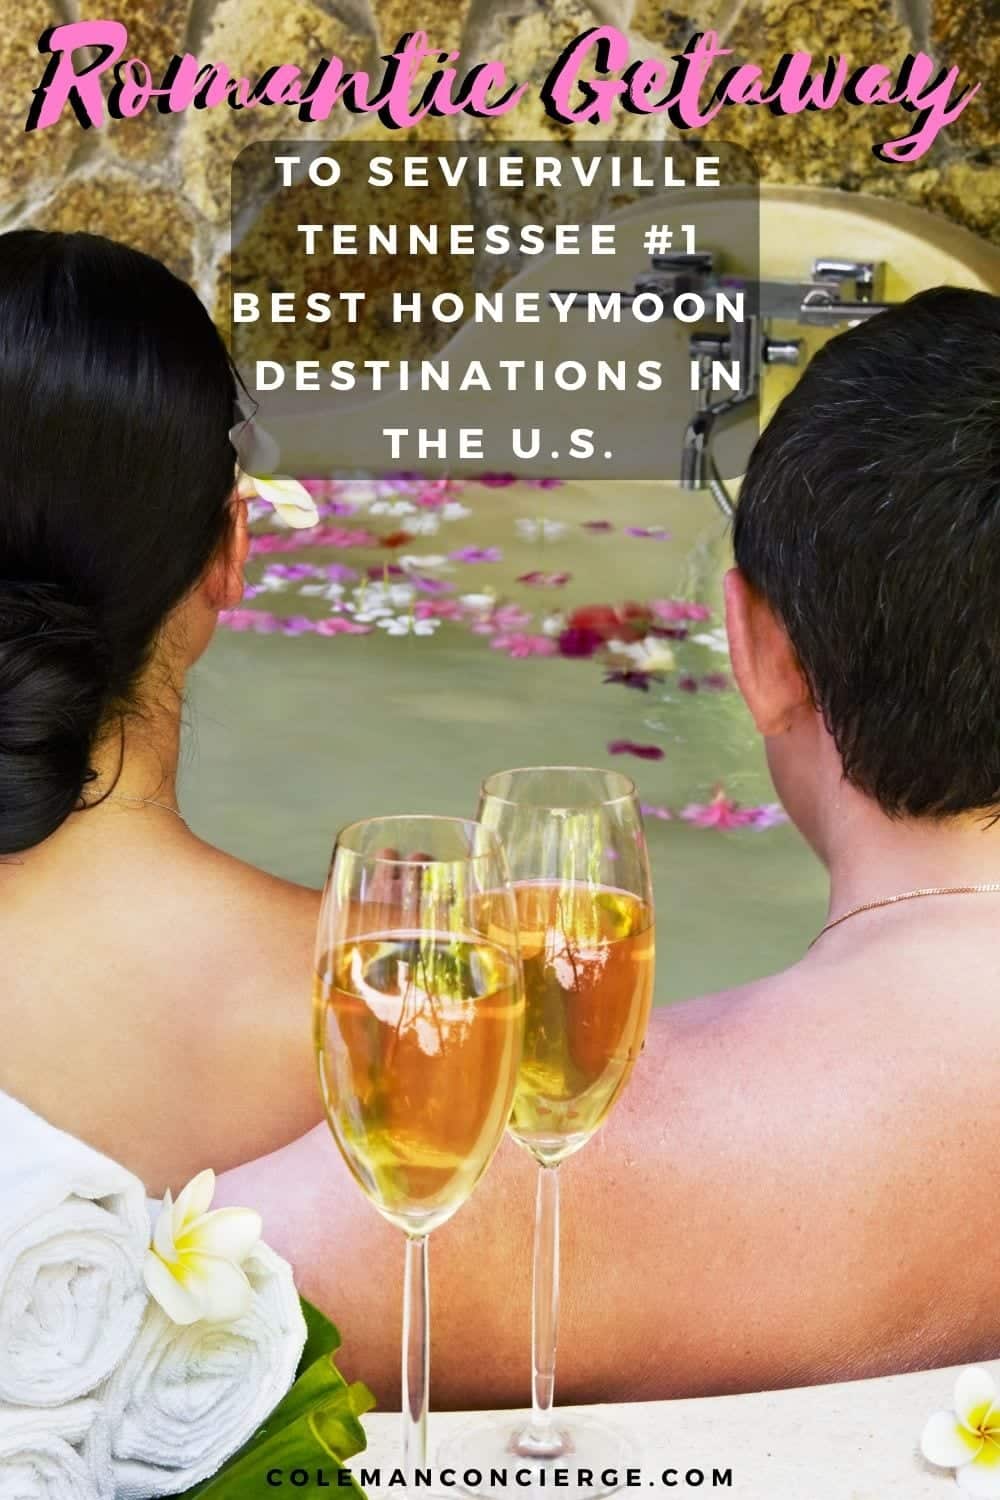 Couple in hot tub with champagne